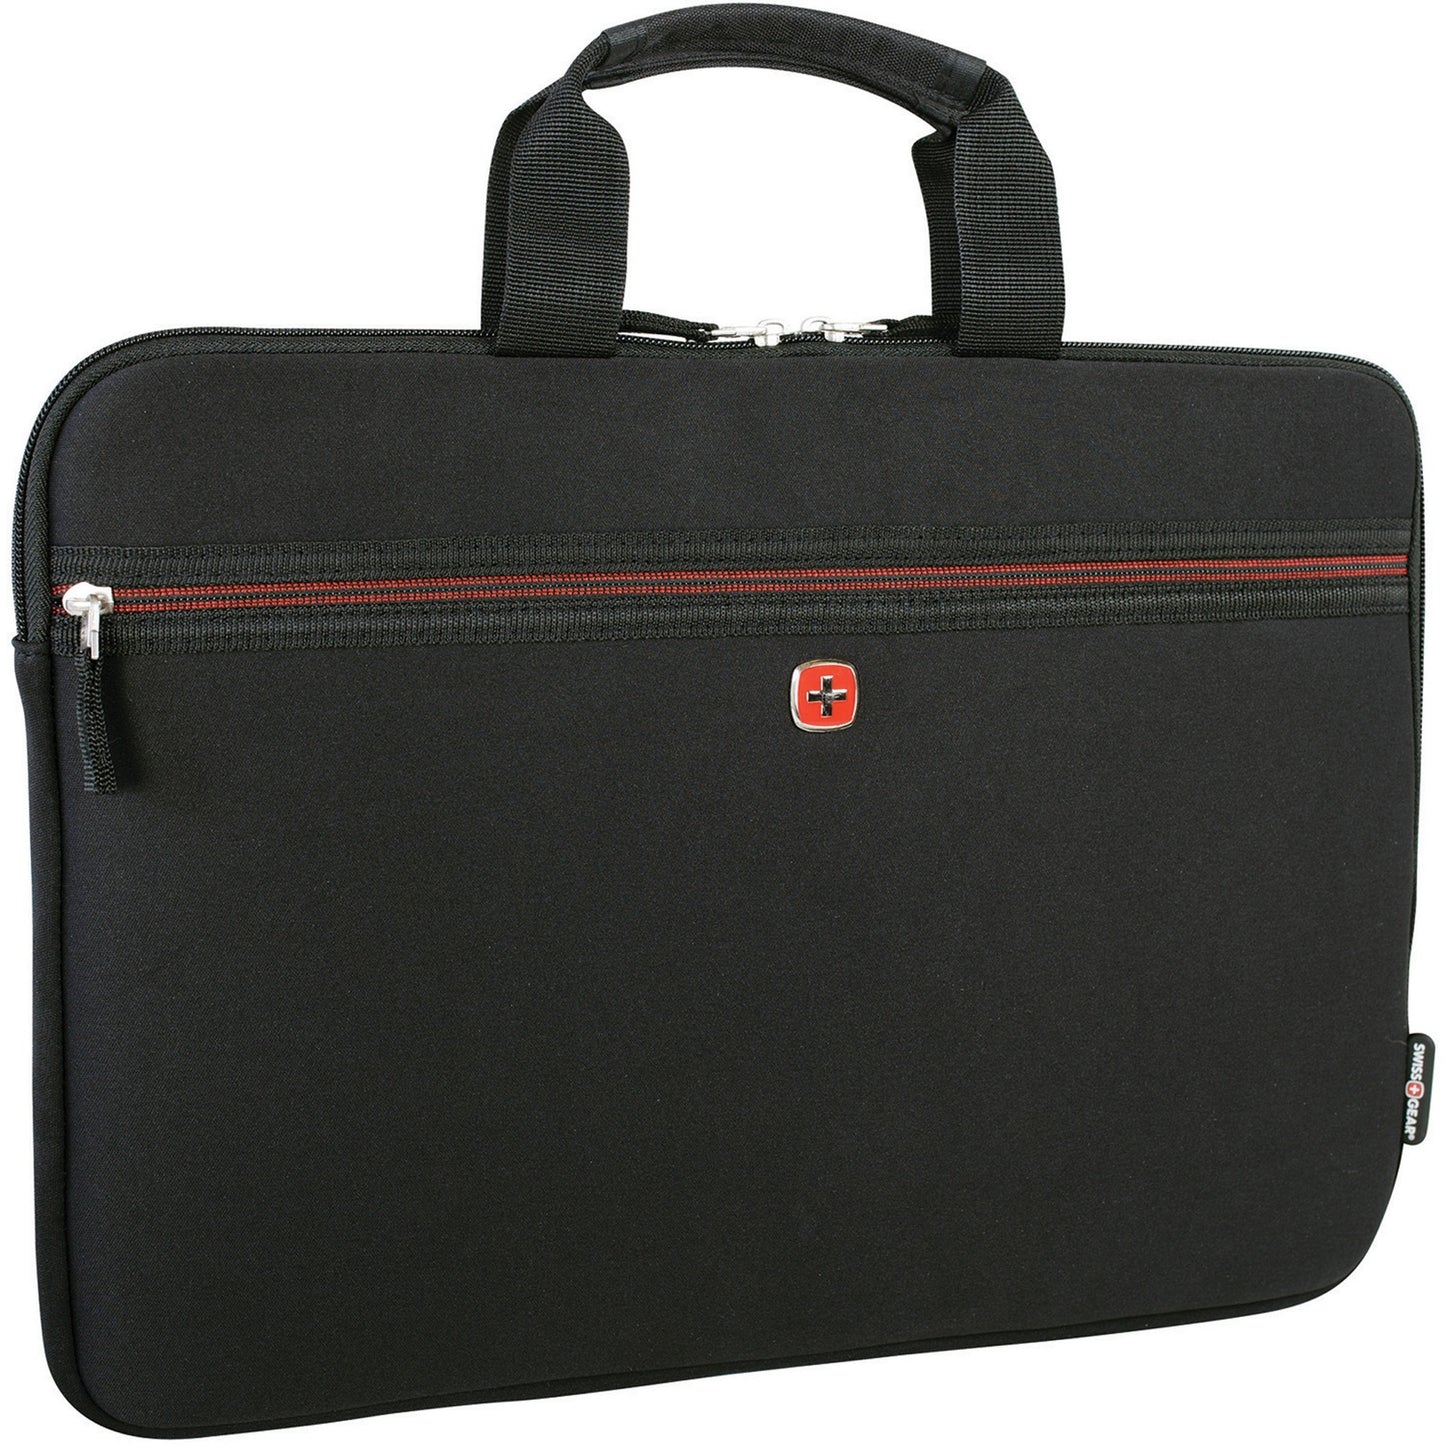 Holiday Carrying Case (Sleeve) for 15.6" Notebook - Black